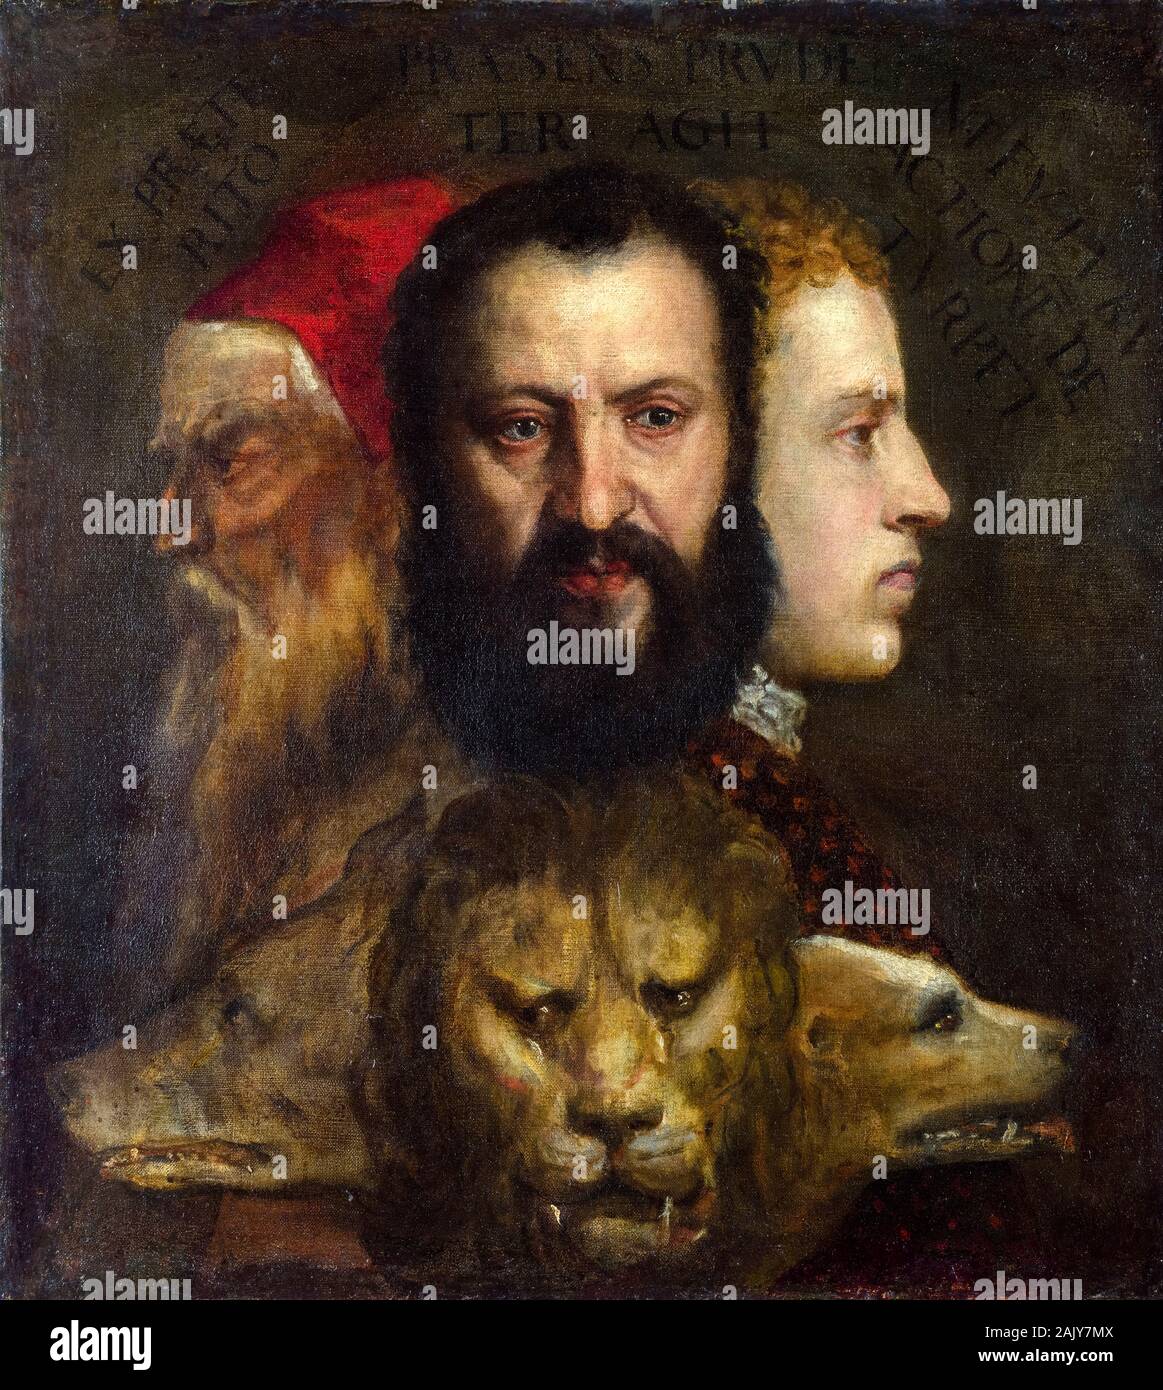 Titian, Tiziano Vecellio, painting in oil on canvas, Allegory of Prudence, 1550-1565 Stock Photo